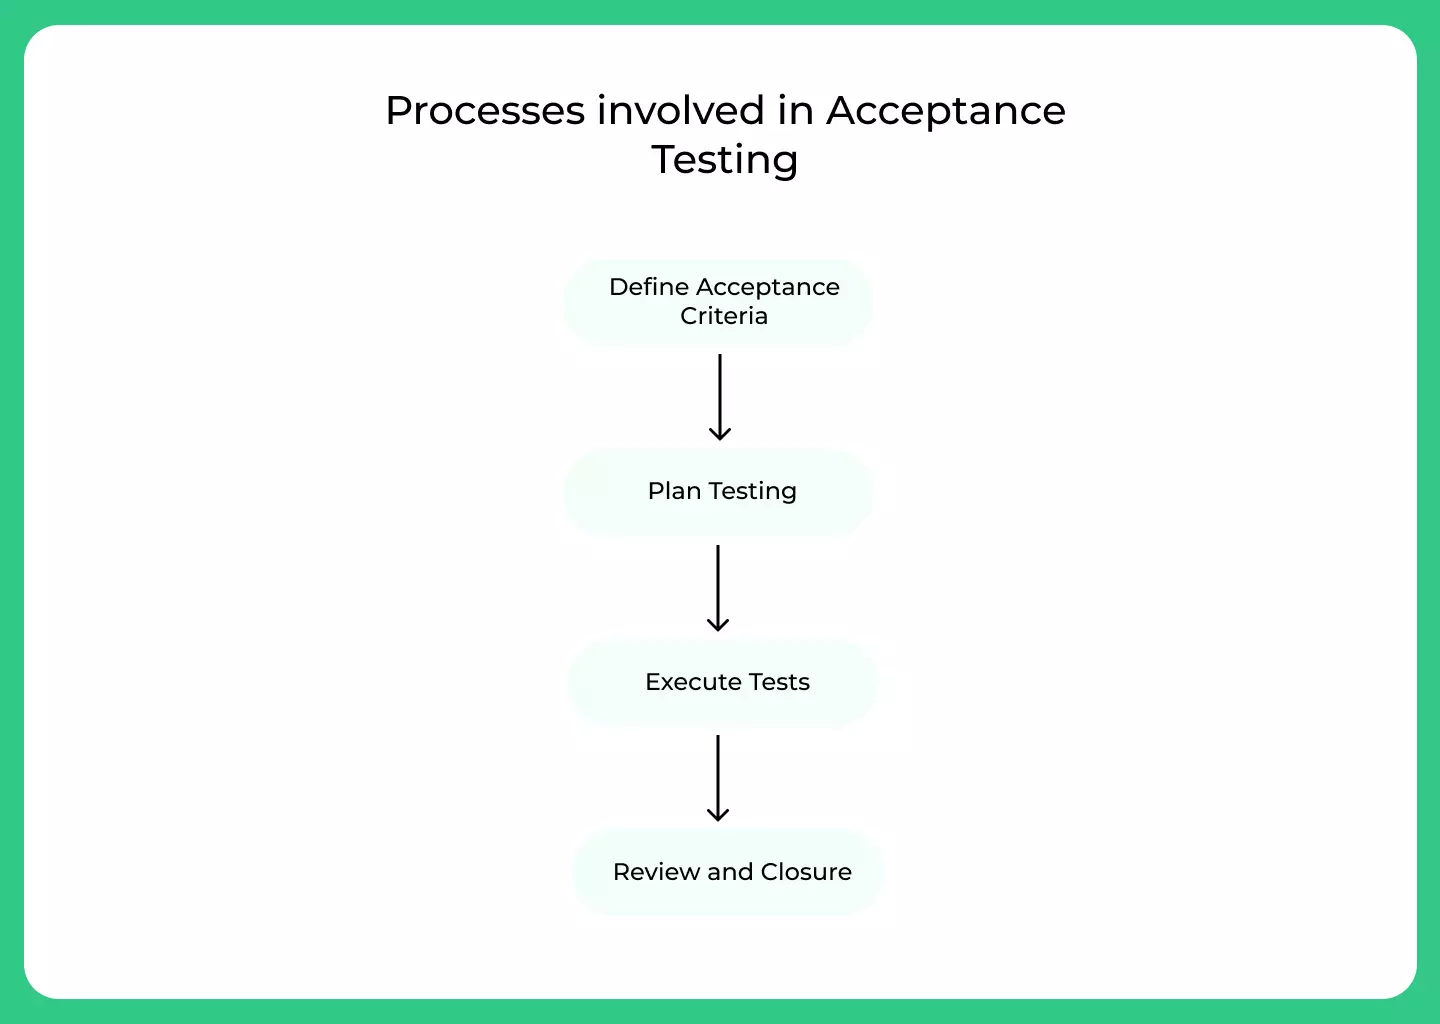 Processes involved in Acceptance Testing